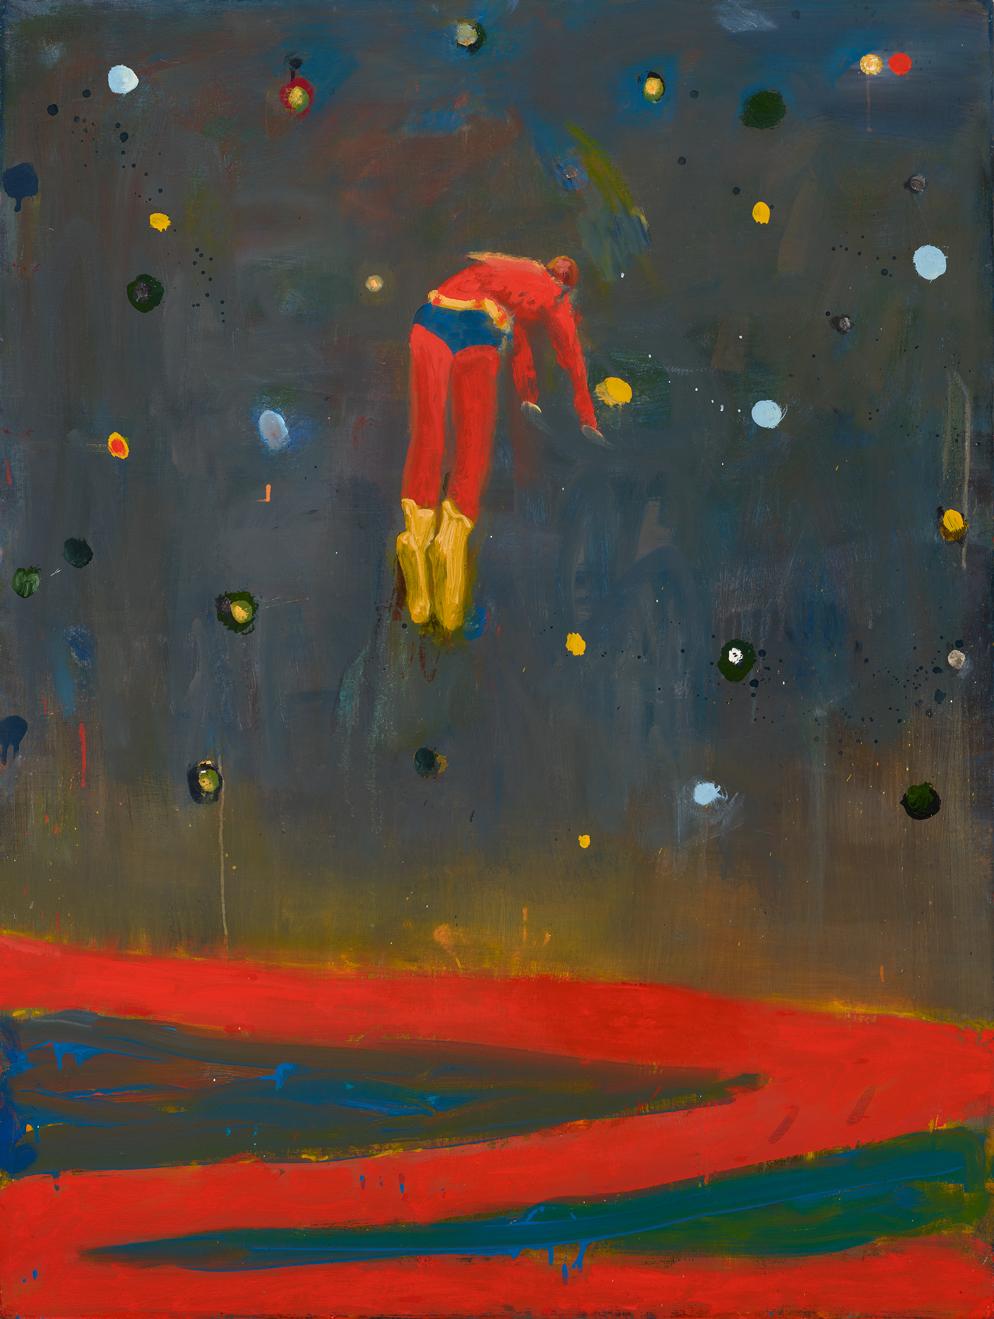 Oil painting of a figure in a superhero outfit floating limply in the air with a dark sky beyond with colorful stars or planets in it and a red path below